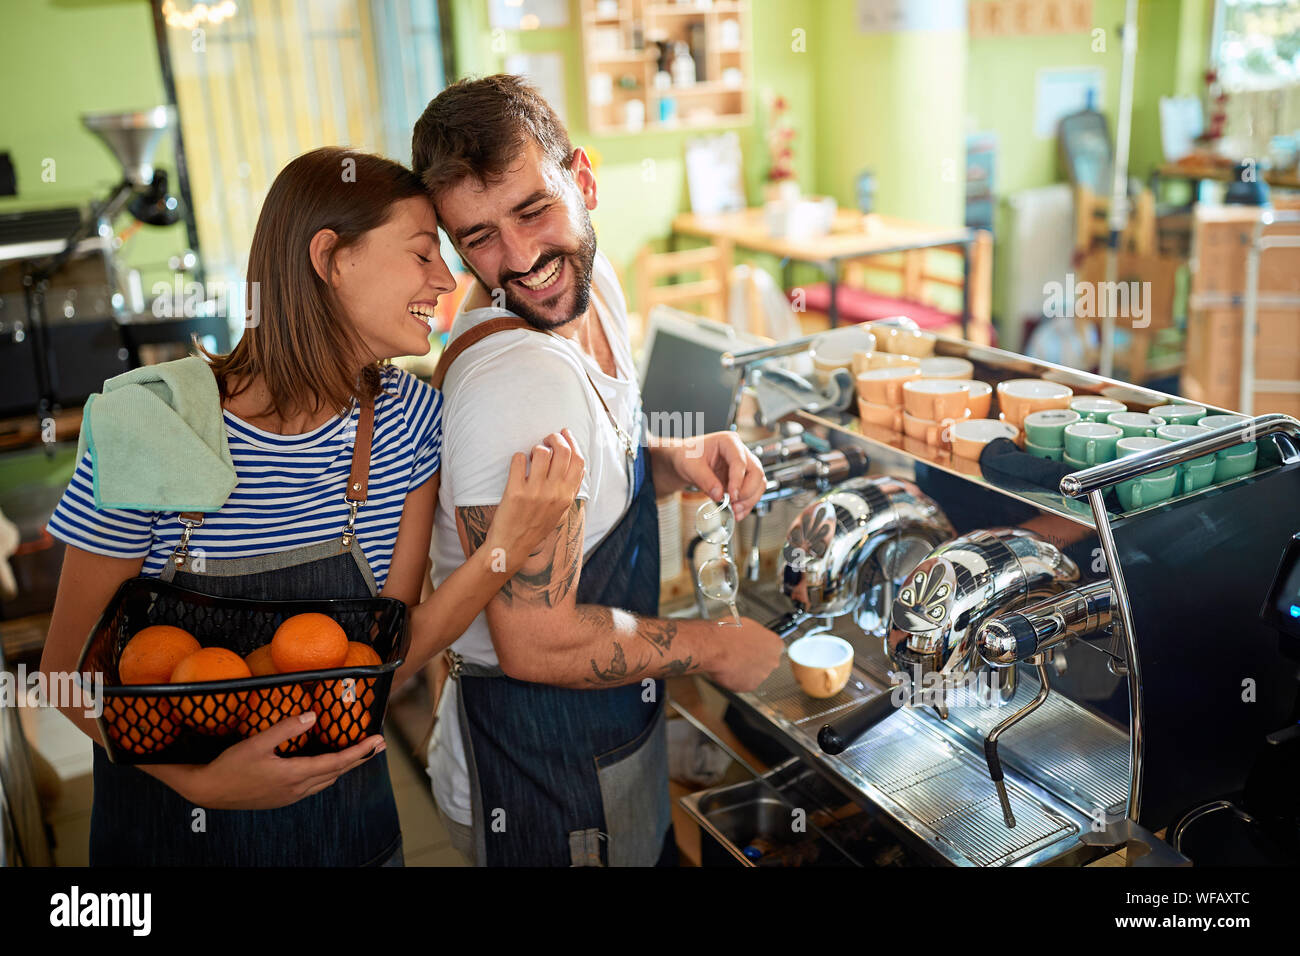 Smiling couple barista owner working at coffee shop Stock Photo